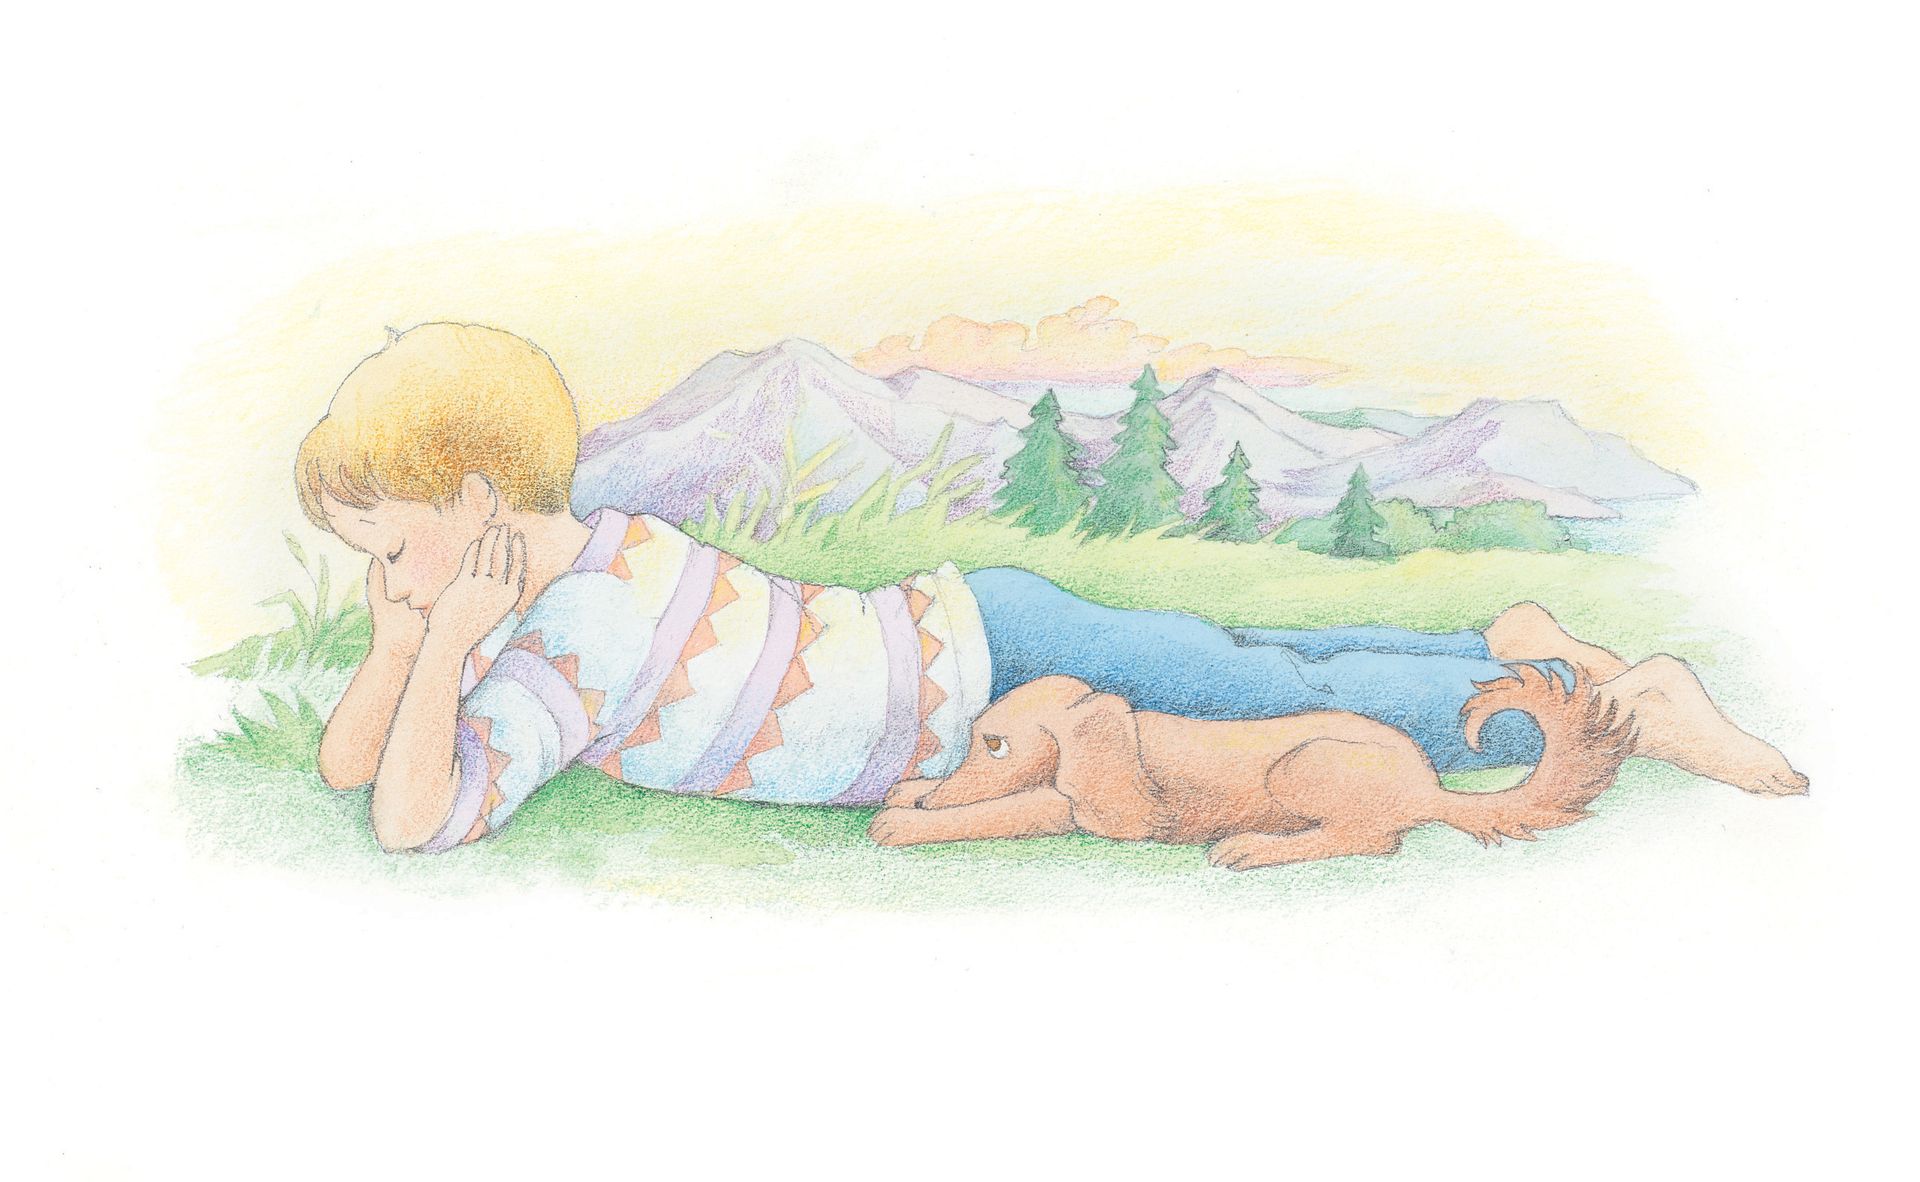 A boy and his dog lying on the ground, looking sad. From the Children’s Songbook, page 98, “Repentance”; watercolor illustration by Phyllis Luch.